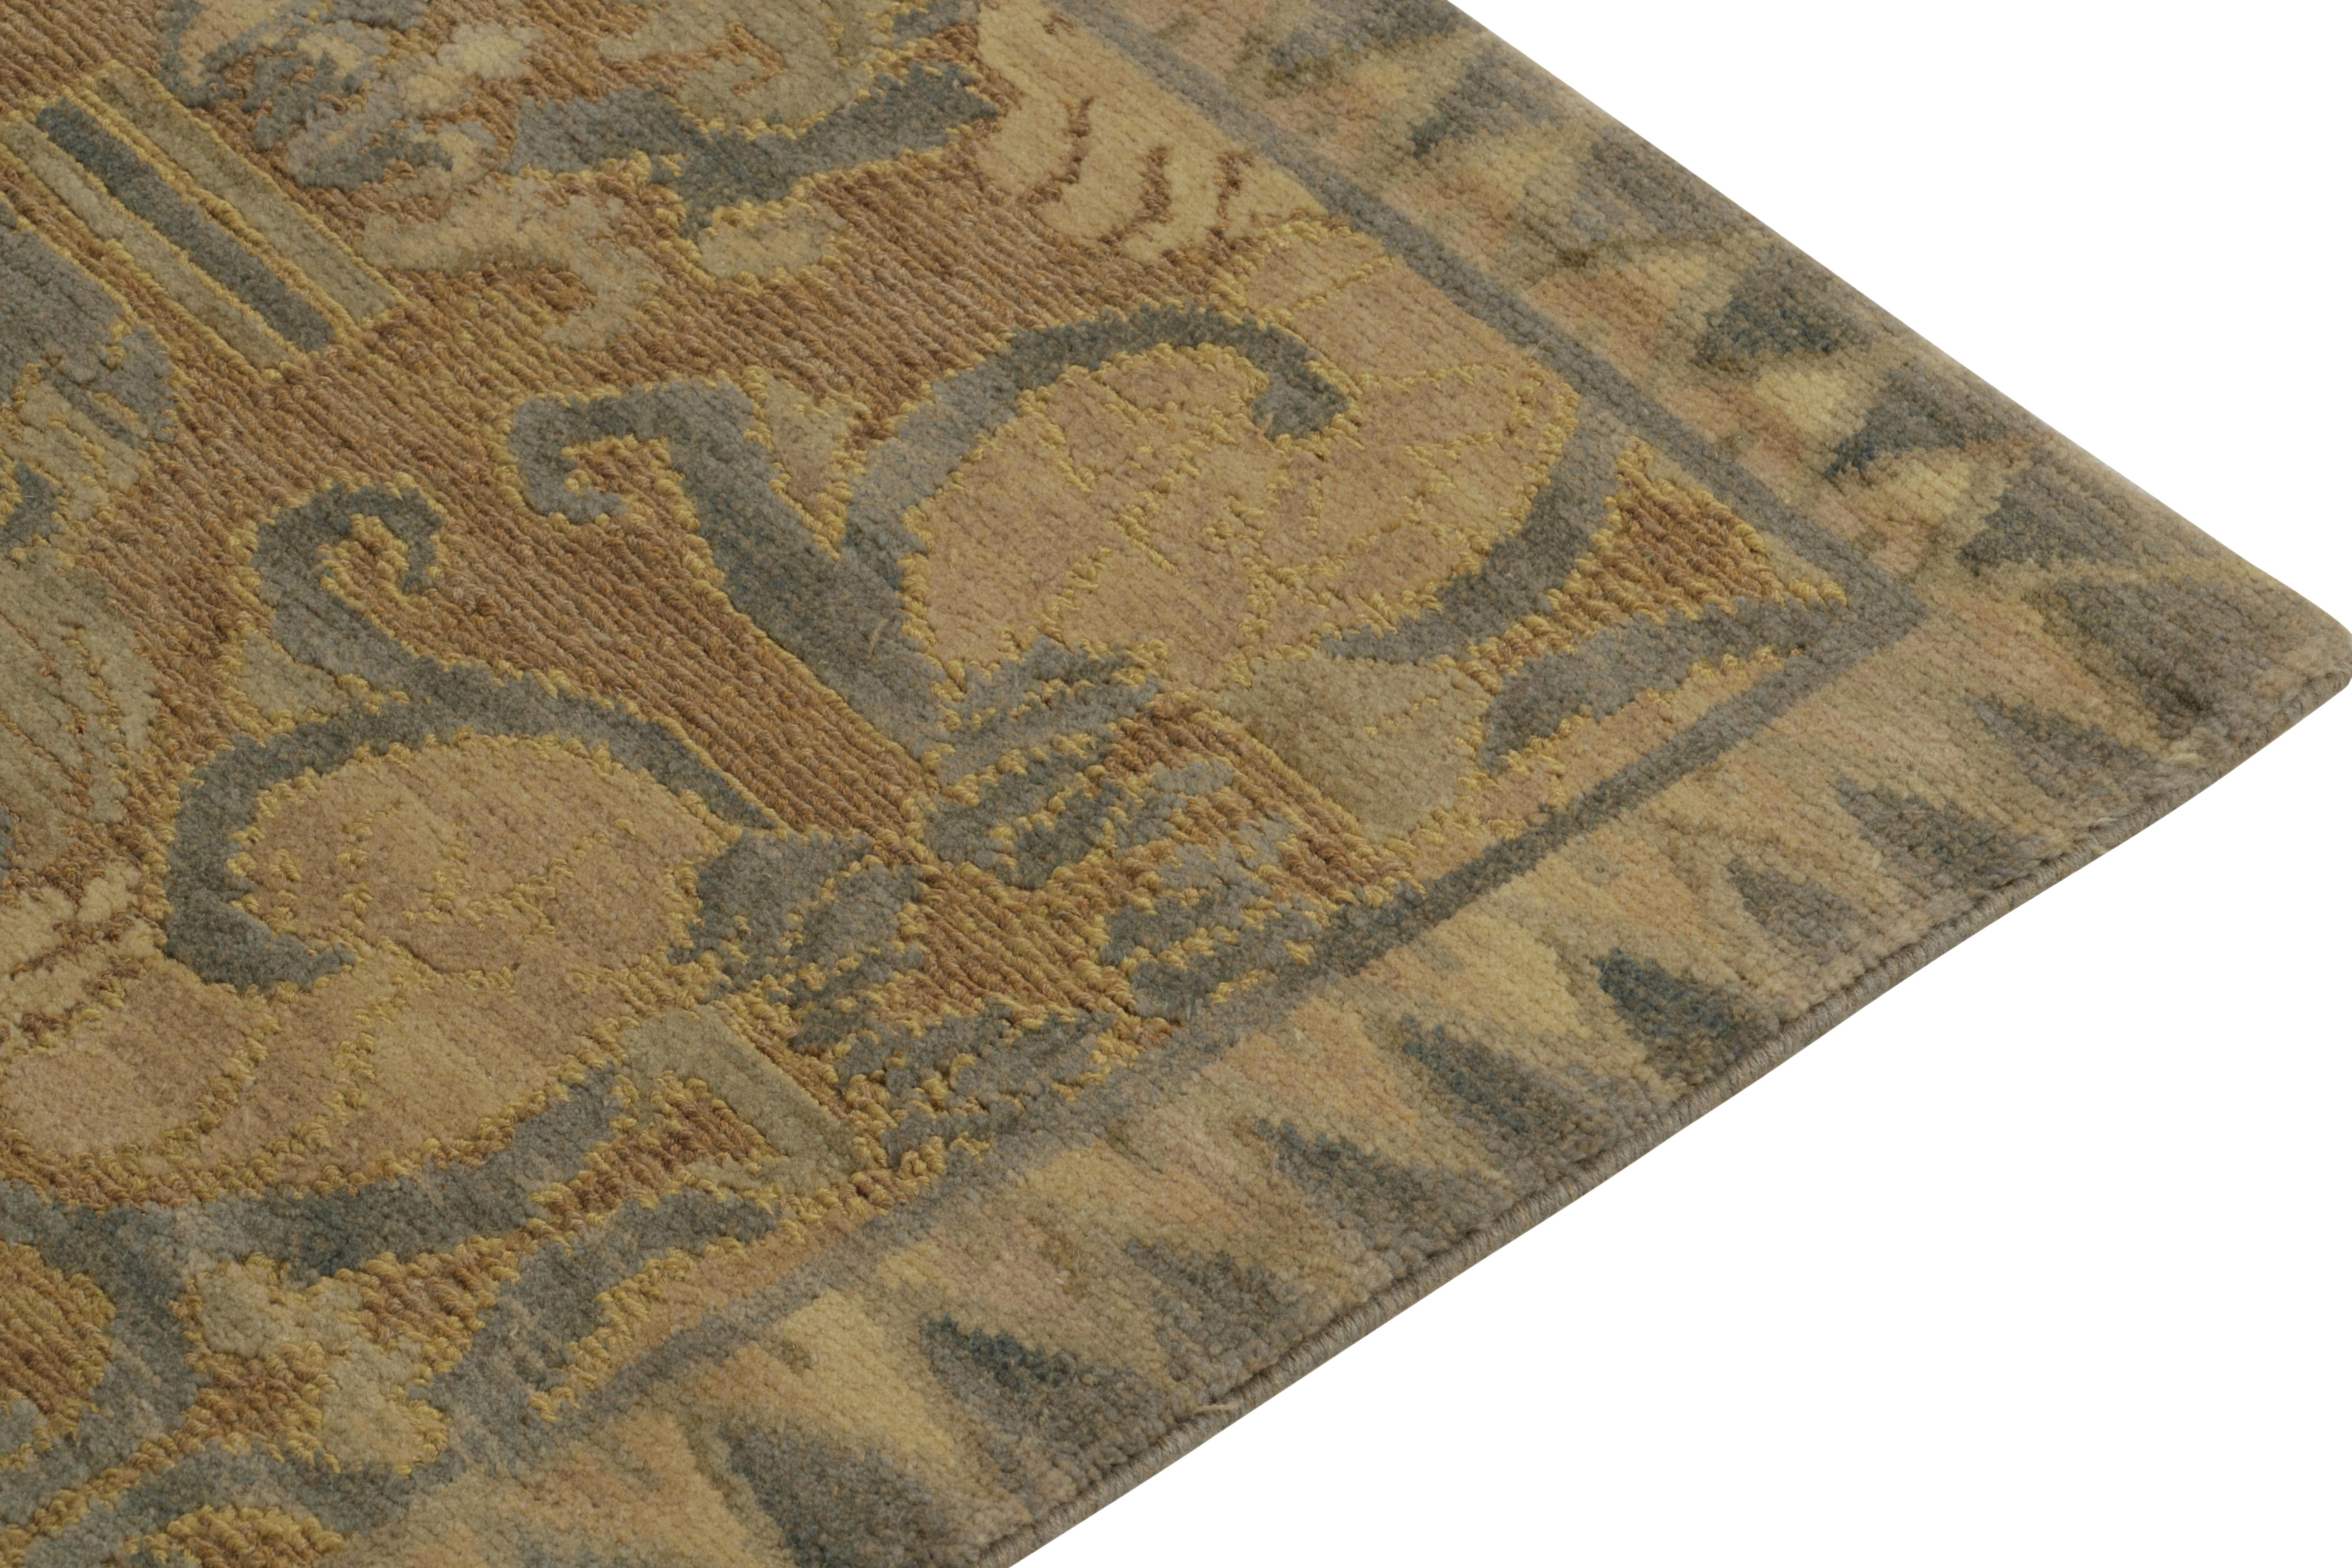 Hand-Knotted Rug & Kilim’s Arts & Crafts Style Rug in Beige-Brown and Blue Floral Patterns For Sale